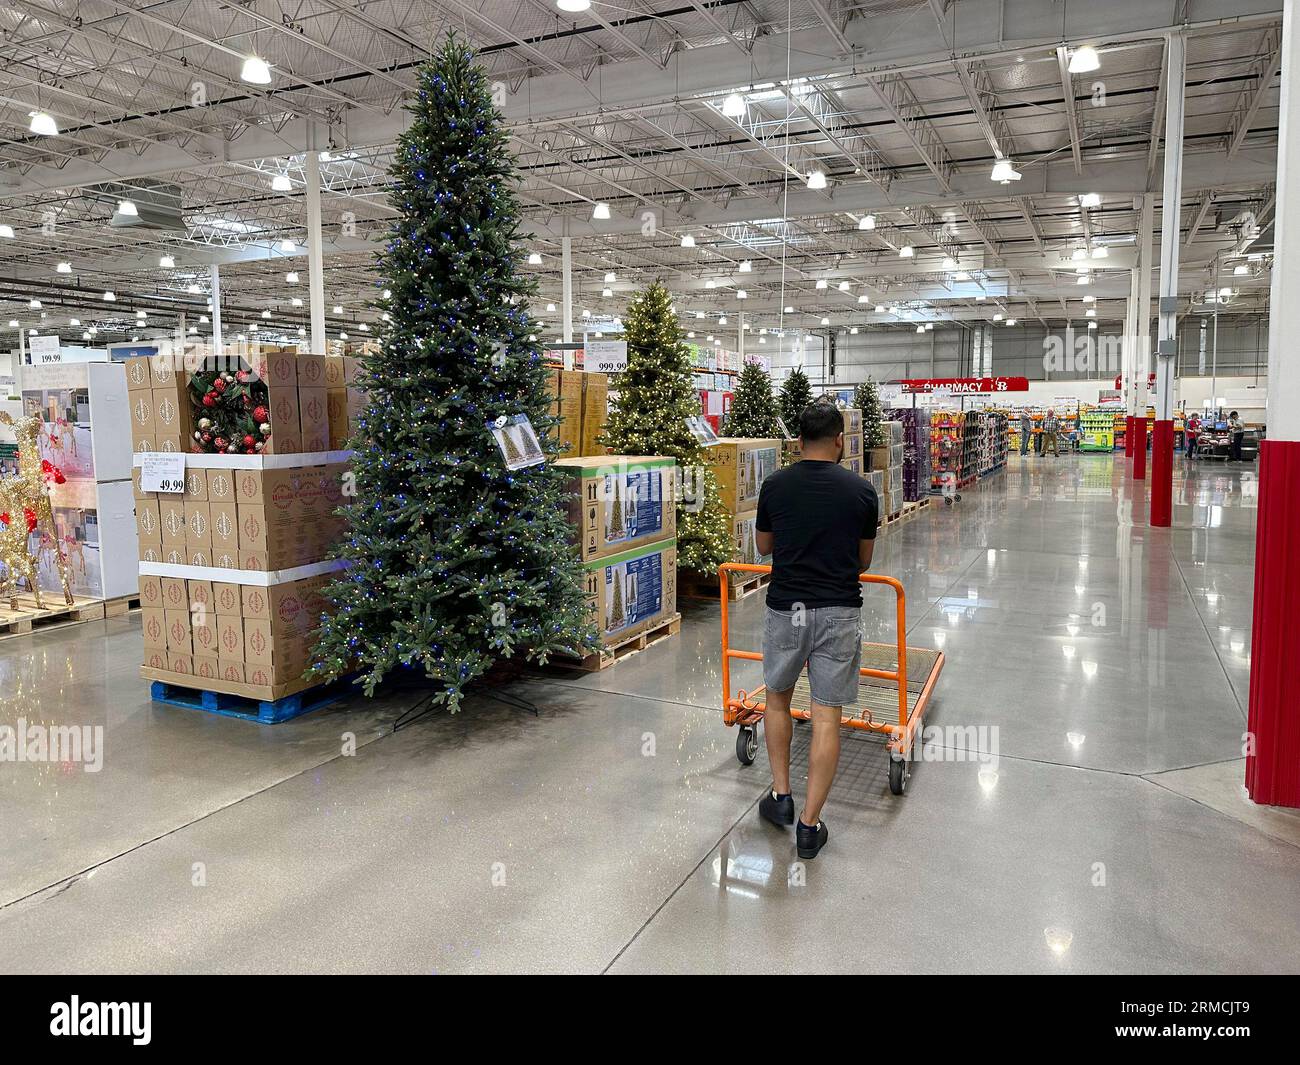 Has anyone bought the Costco Christmas Tree and check to see which